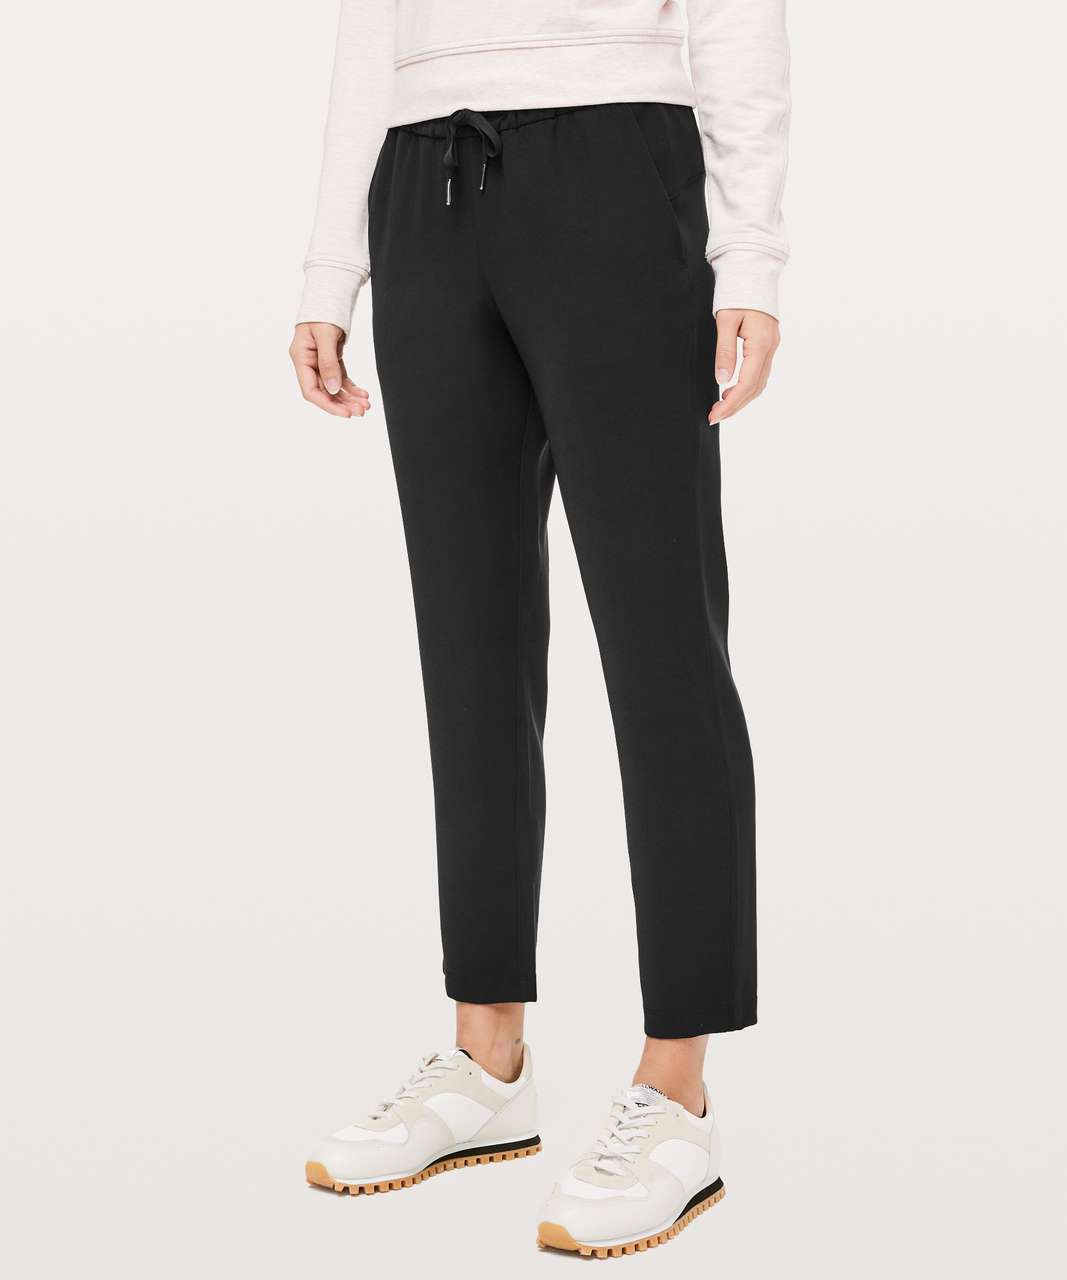 on the fly pant woven